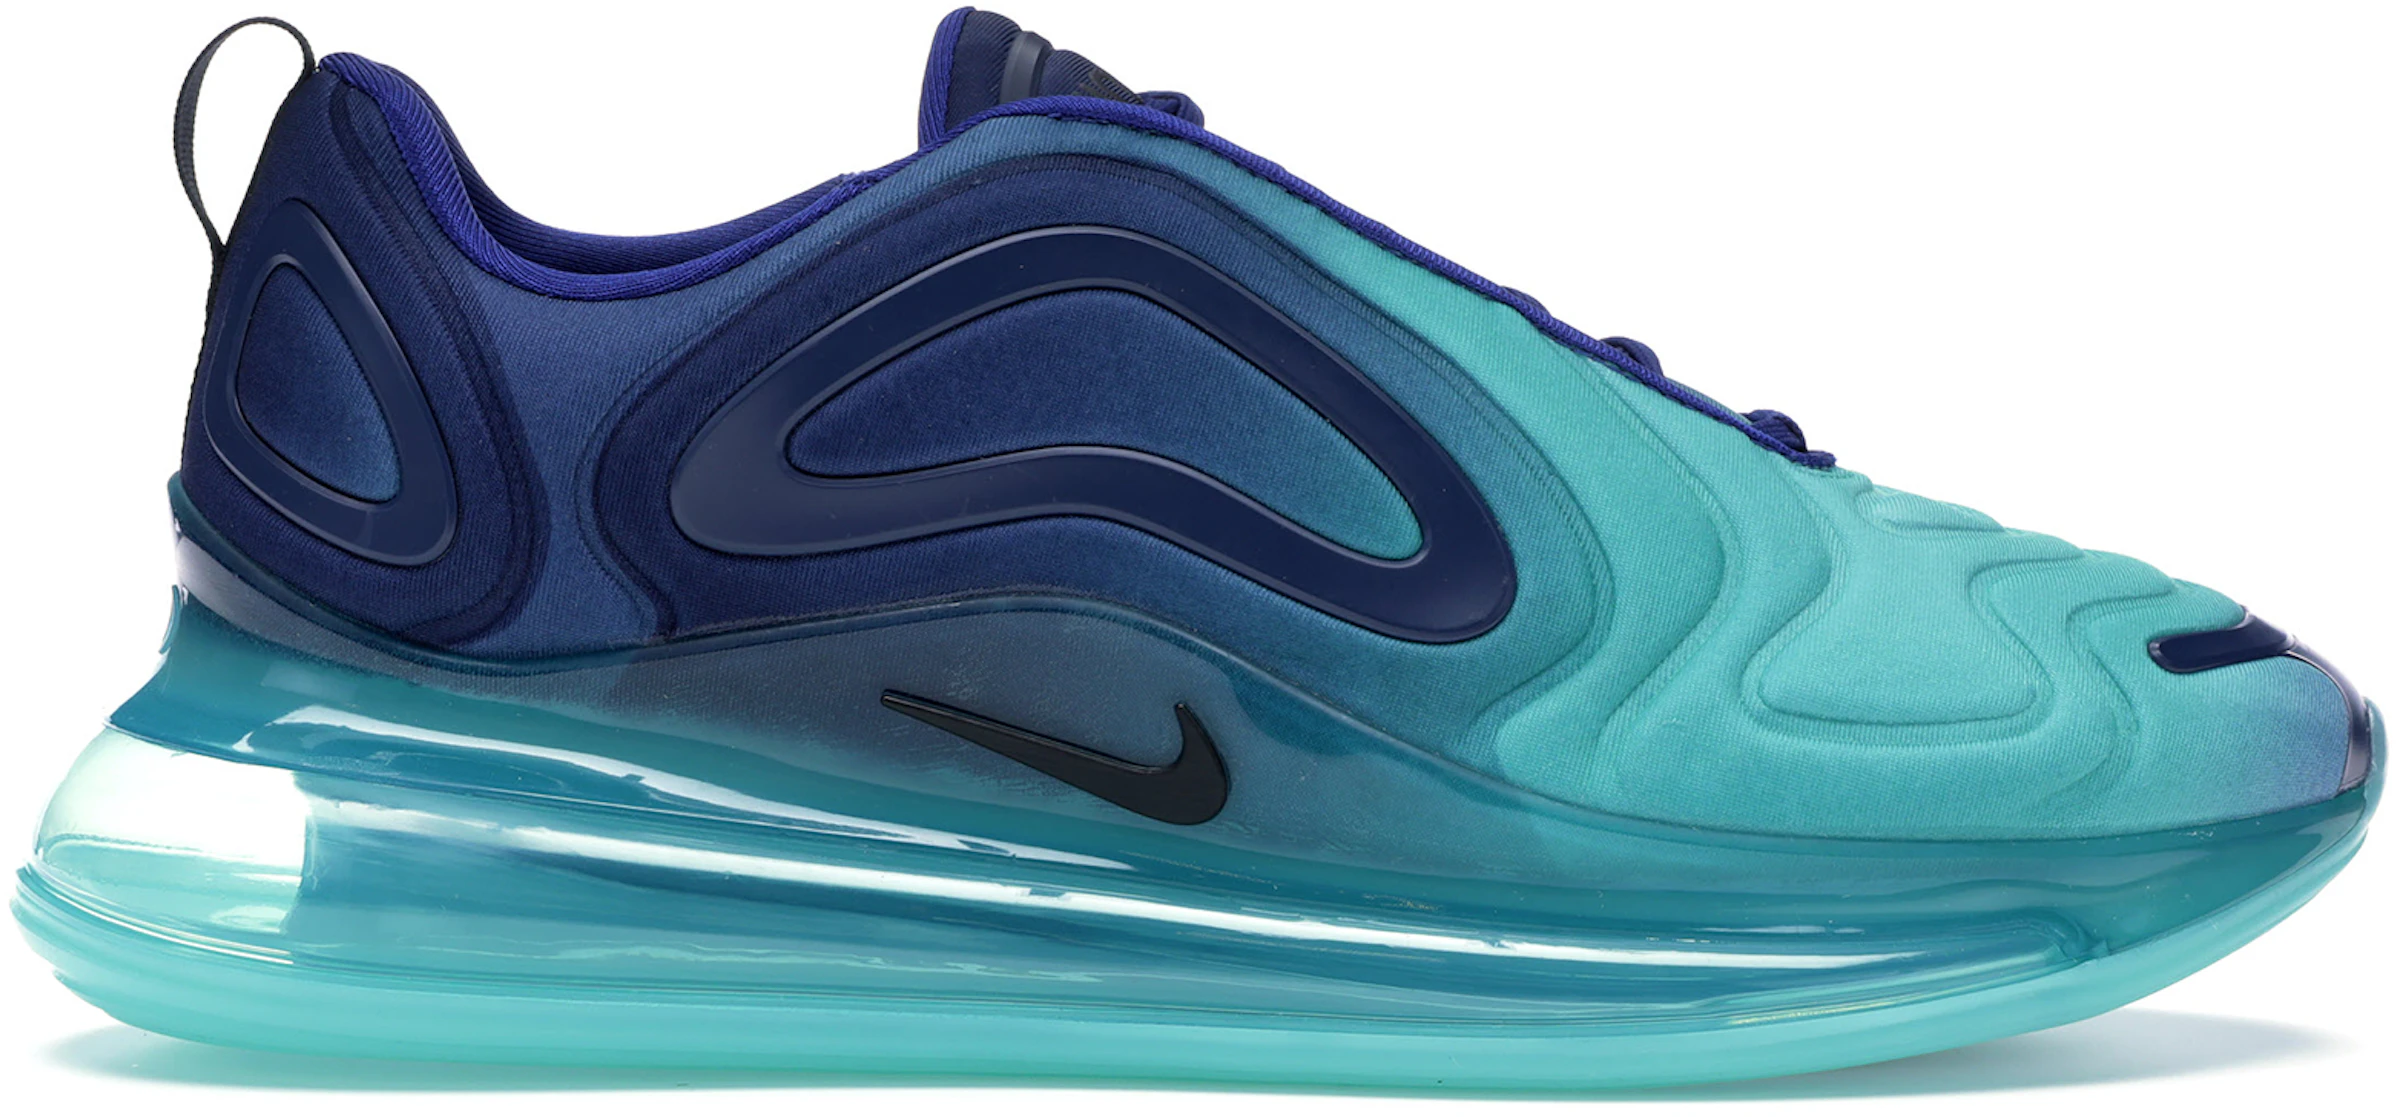 Nike Air Max 720 Sea Forest - Ao2924-400 - Us